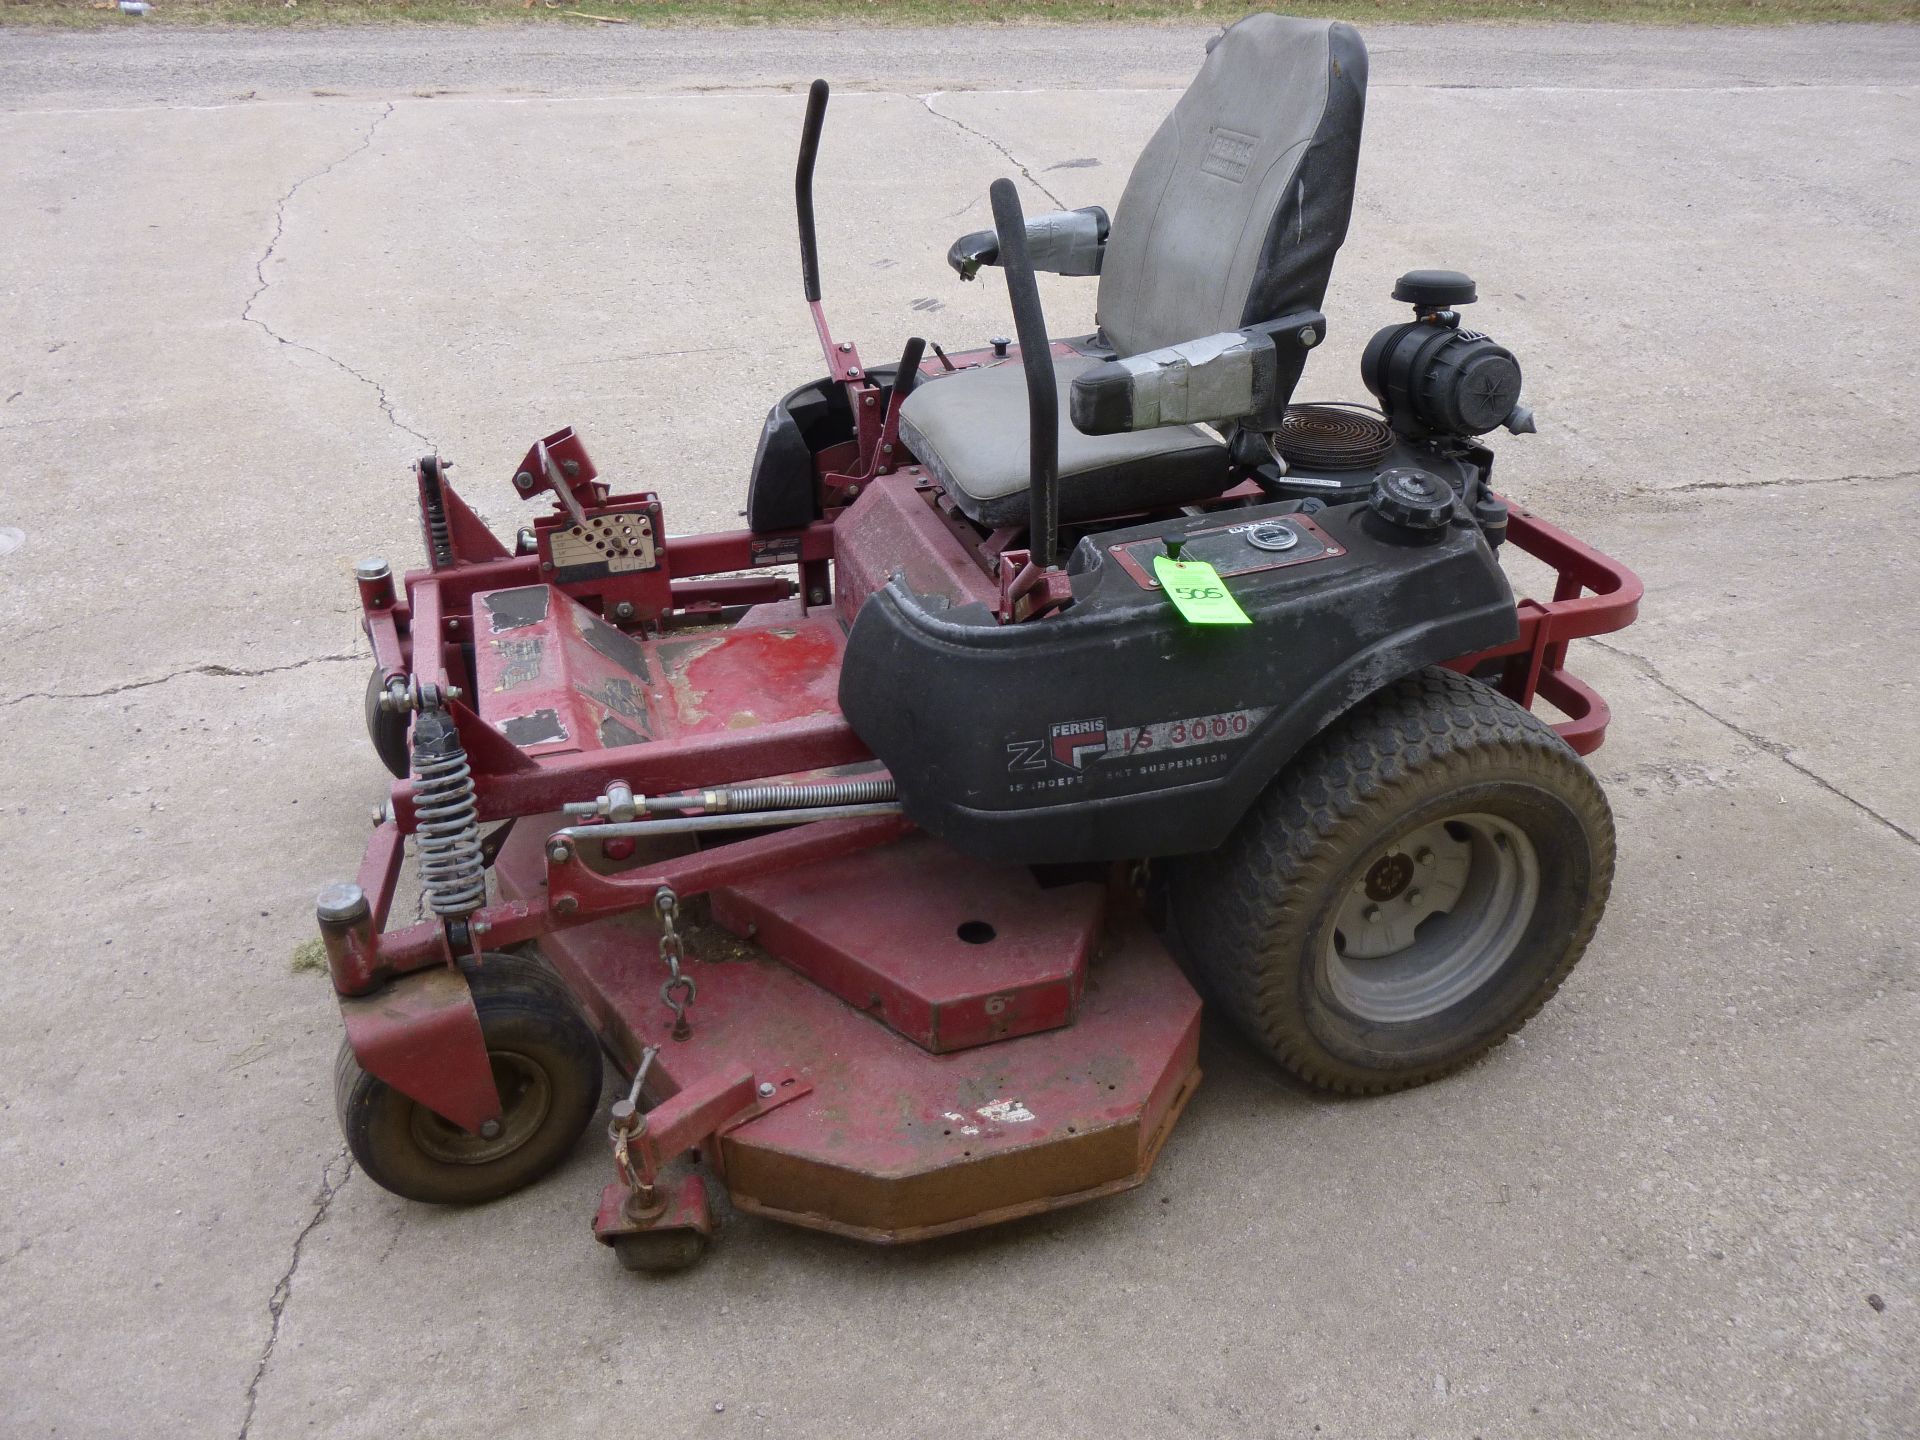 Ferris IS3000 zero turn mower 61" deck Gas Kohler Command 27 Motor Runs and drives (located at 500